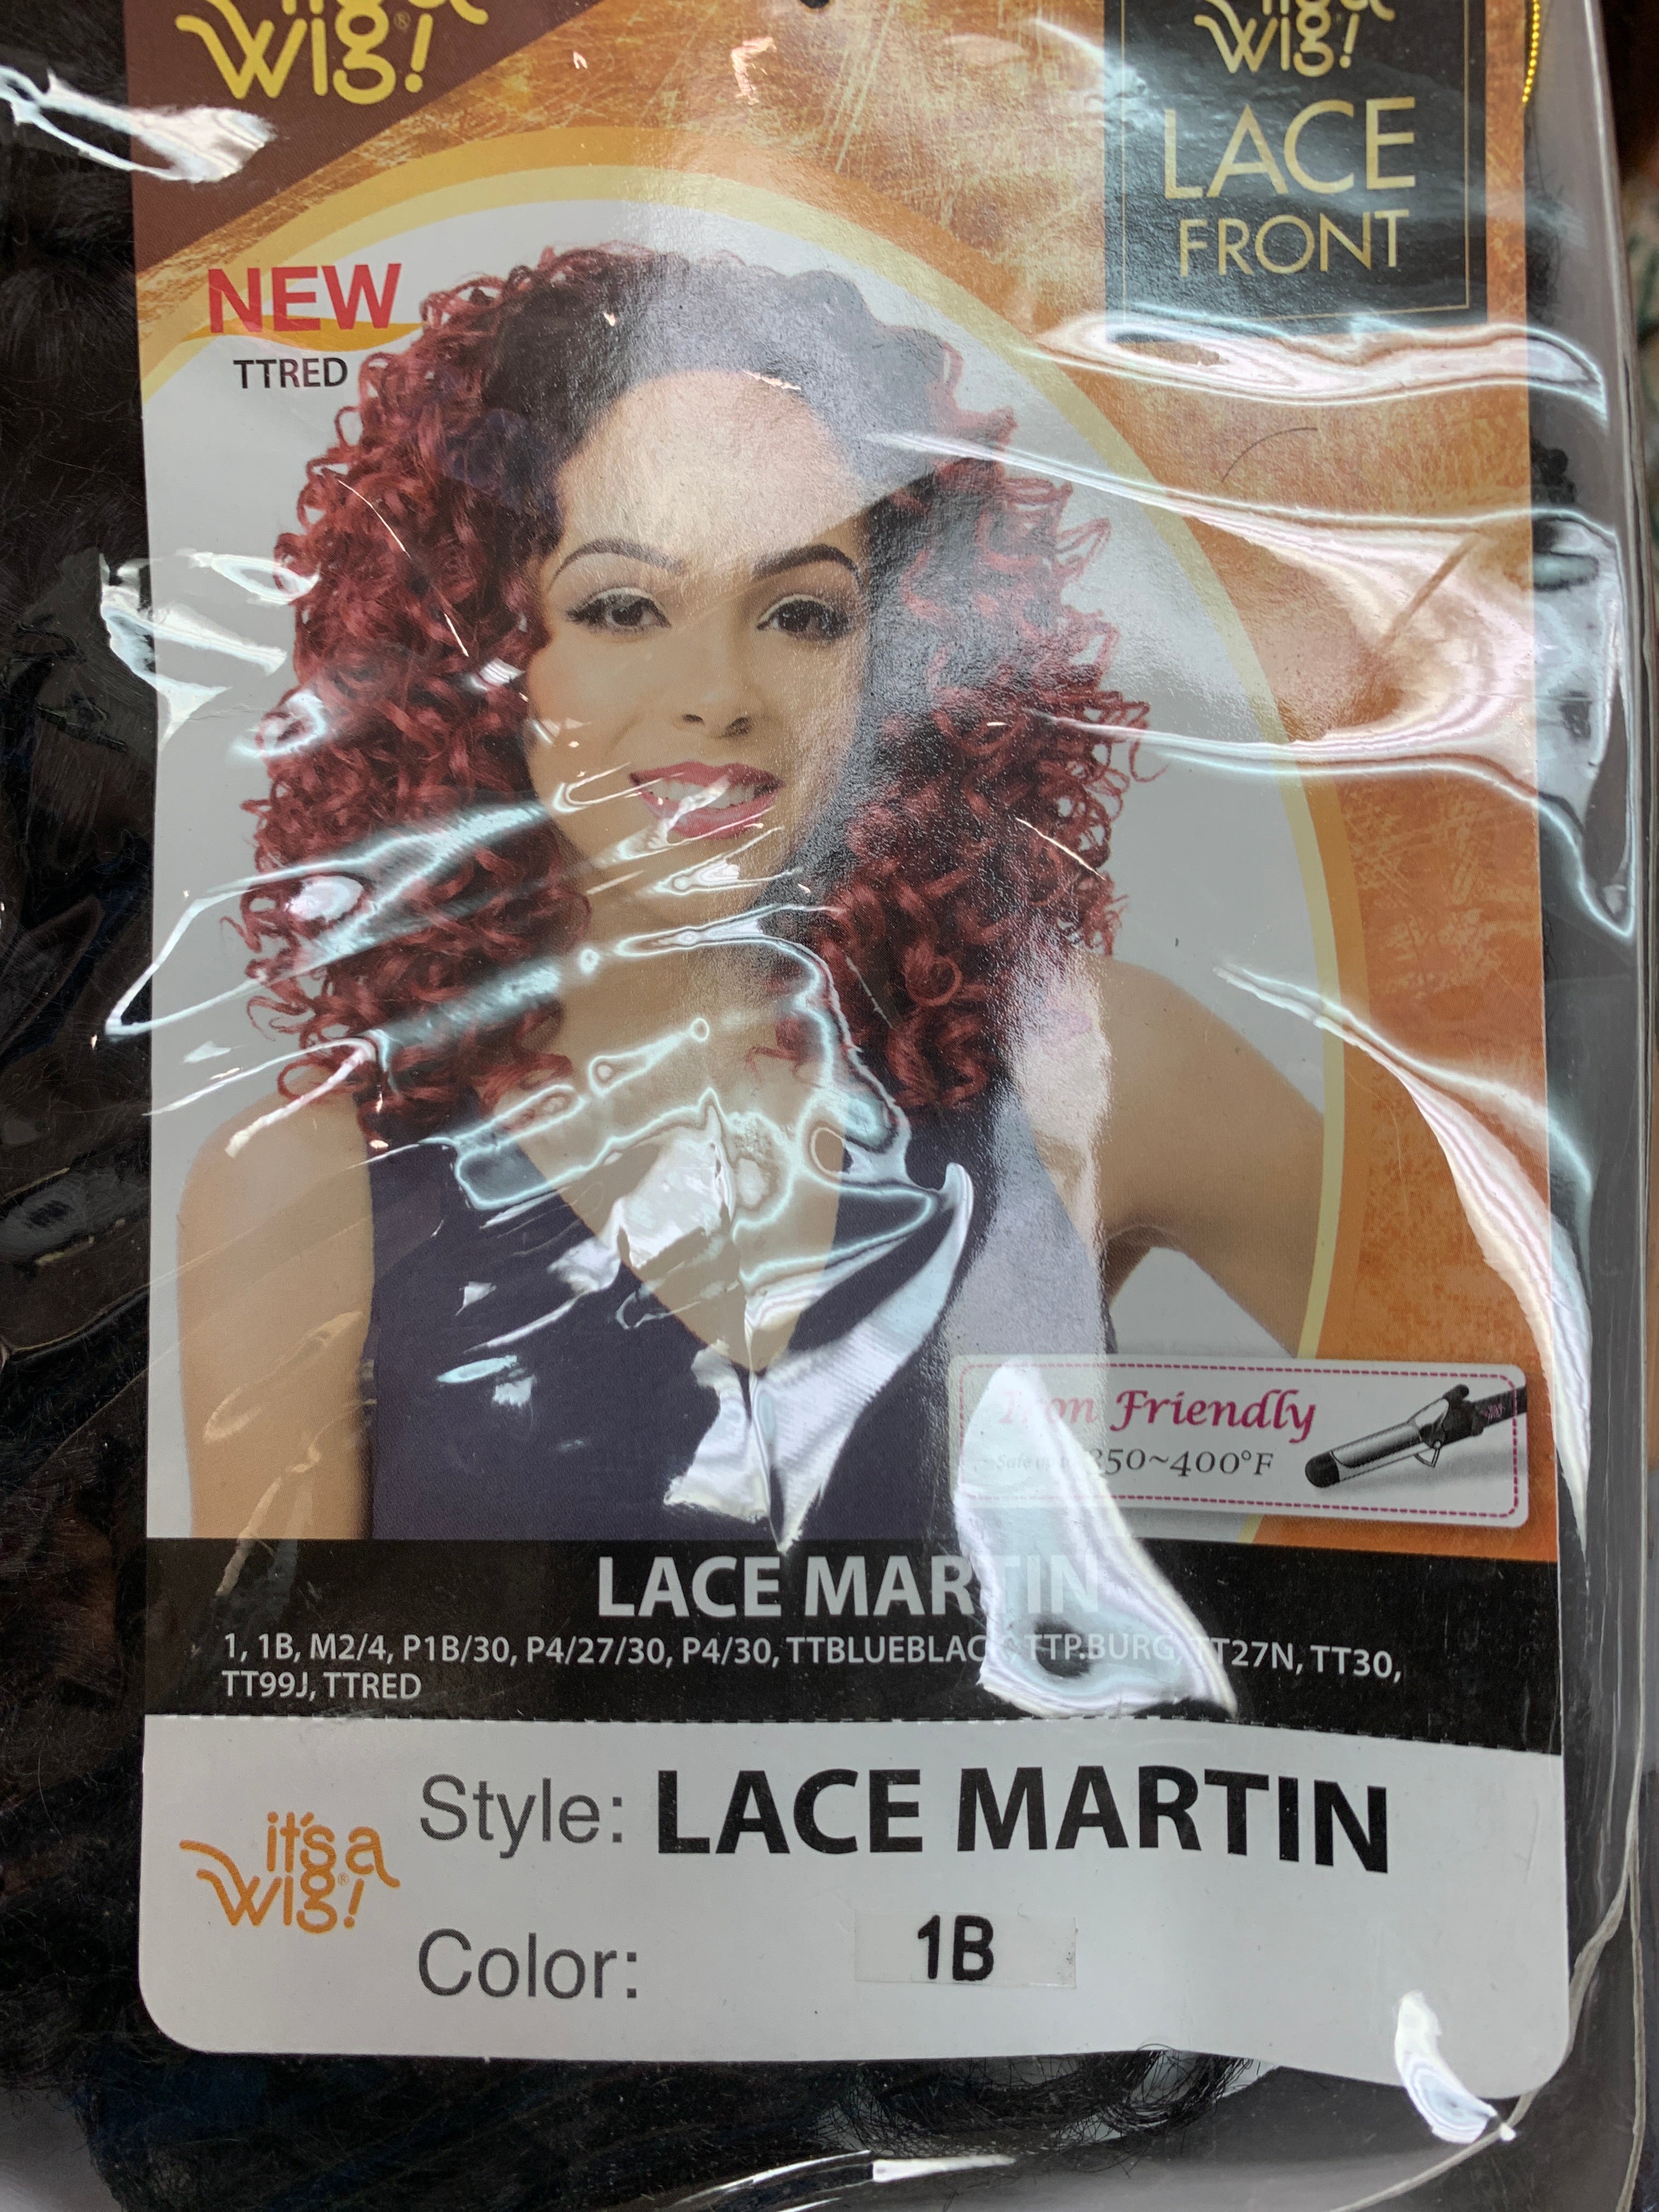 It’s a wig Lace martin